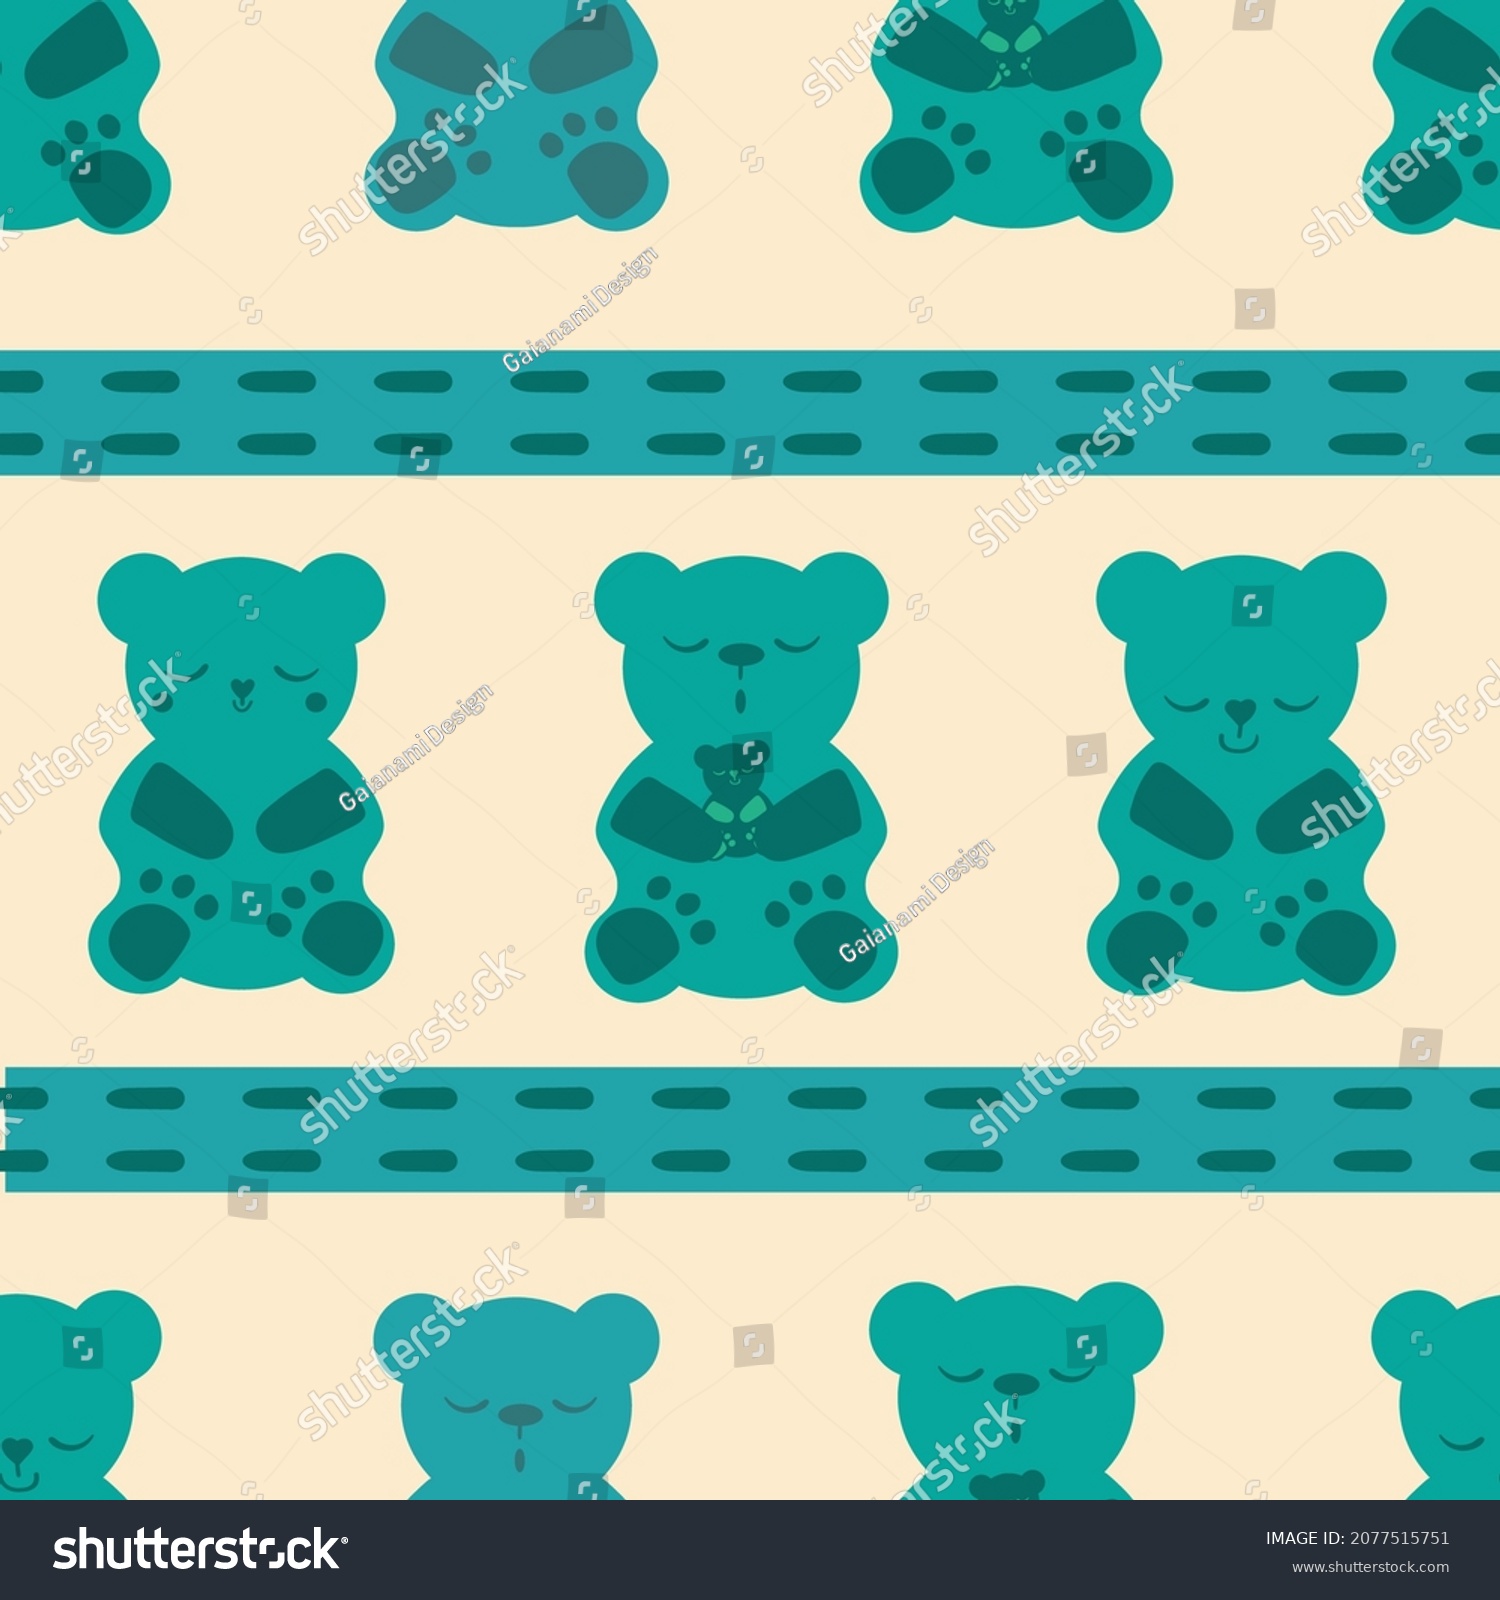 SVG of Sleep gummies stitch ribbon vector seamless pattern background. Backdrop with blue green sleepy gummy bears and horizontal stripe. Cute kawaii style characters for sleeping well, health concept. svg